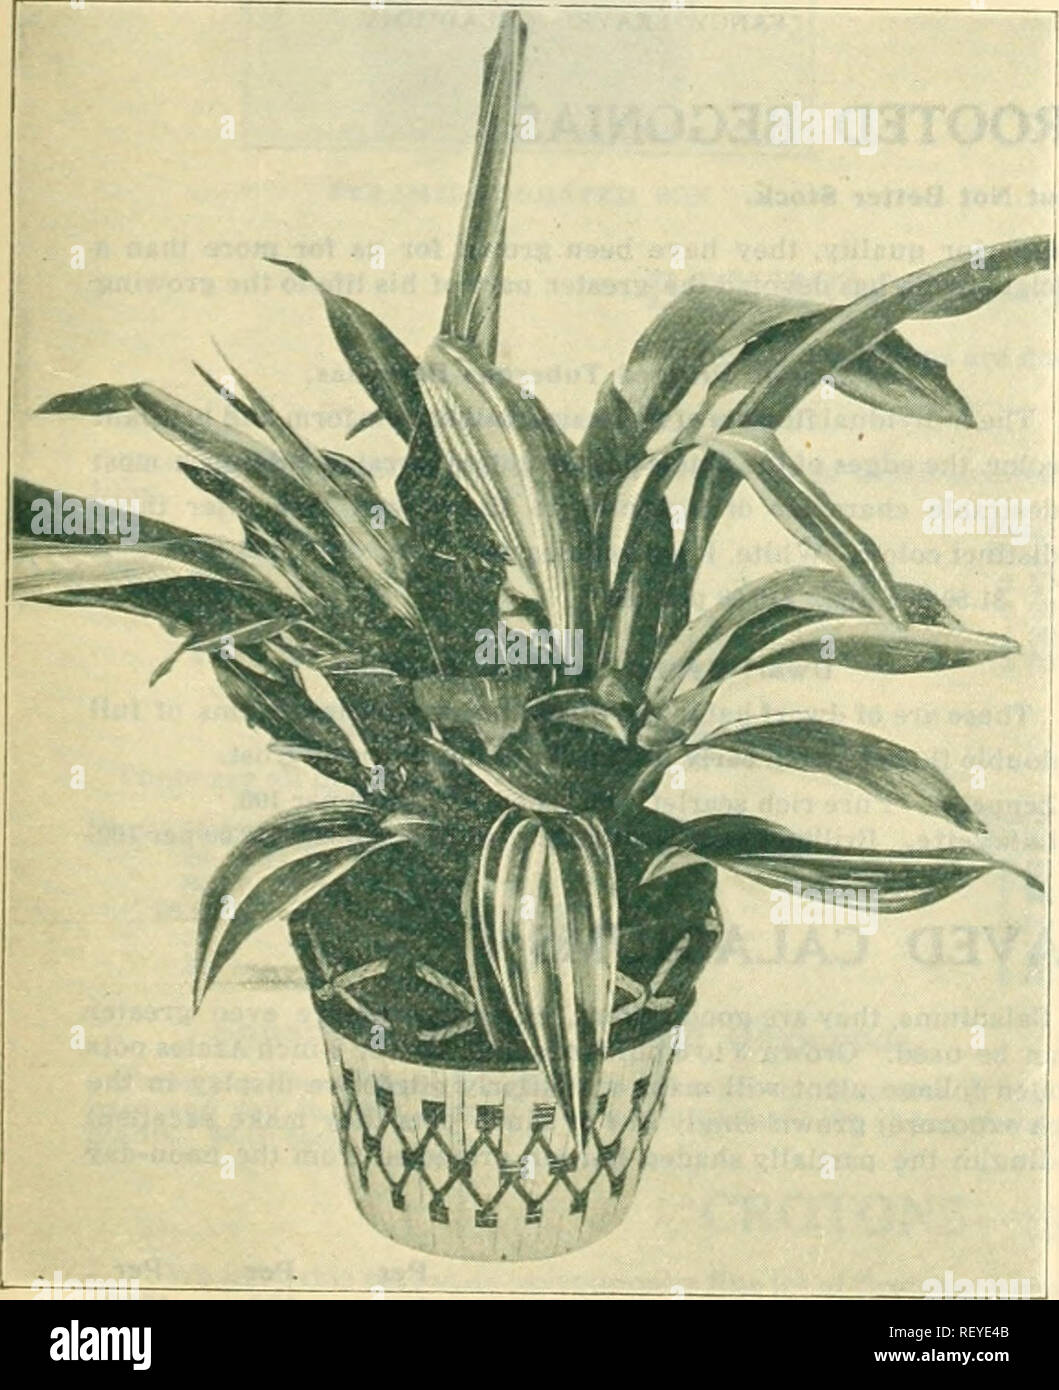 . Dreer's seasonable specialties for florists including flower seeds, bulbs decorative plants for Easter hardy plants, et. etc. Plants, Ornamental Catalogs; Flowers Seeds Catalogs; Nurseries (Horticulture) Catalogs. ARALIA ELEGANTISSIMA. ASPIDISTRA LURIDA VARIEGATA ANANAS (Variegated Pineapple) Ananas Sativa Variegata. Variegated Pineapple. A splendid lot of nicely colored plants at a price which will permit of their use in choice made-up hampers. Each Good 4 inch pots to 60 Fine 5 &quot; 1 00 &quot; 6 &quot; 1 BO Aralia Elegantissima. A graceful plant to use in fine decorations and particular Stock Photo